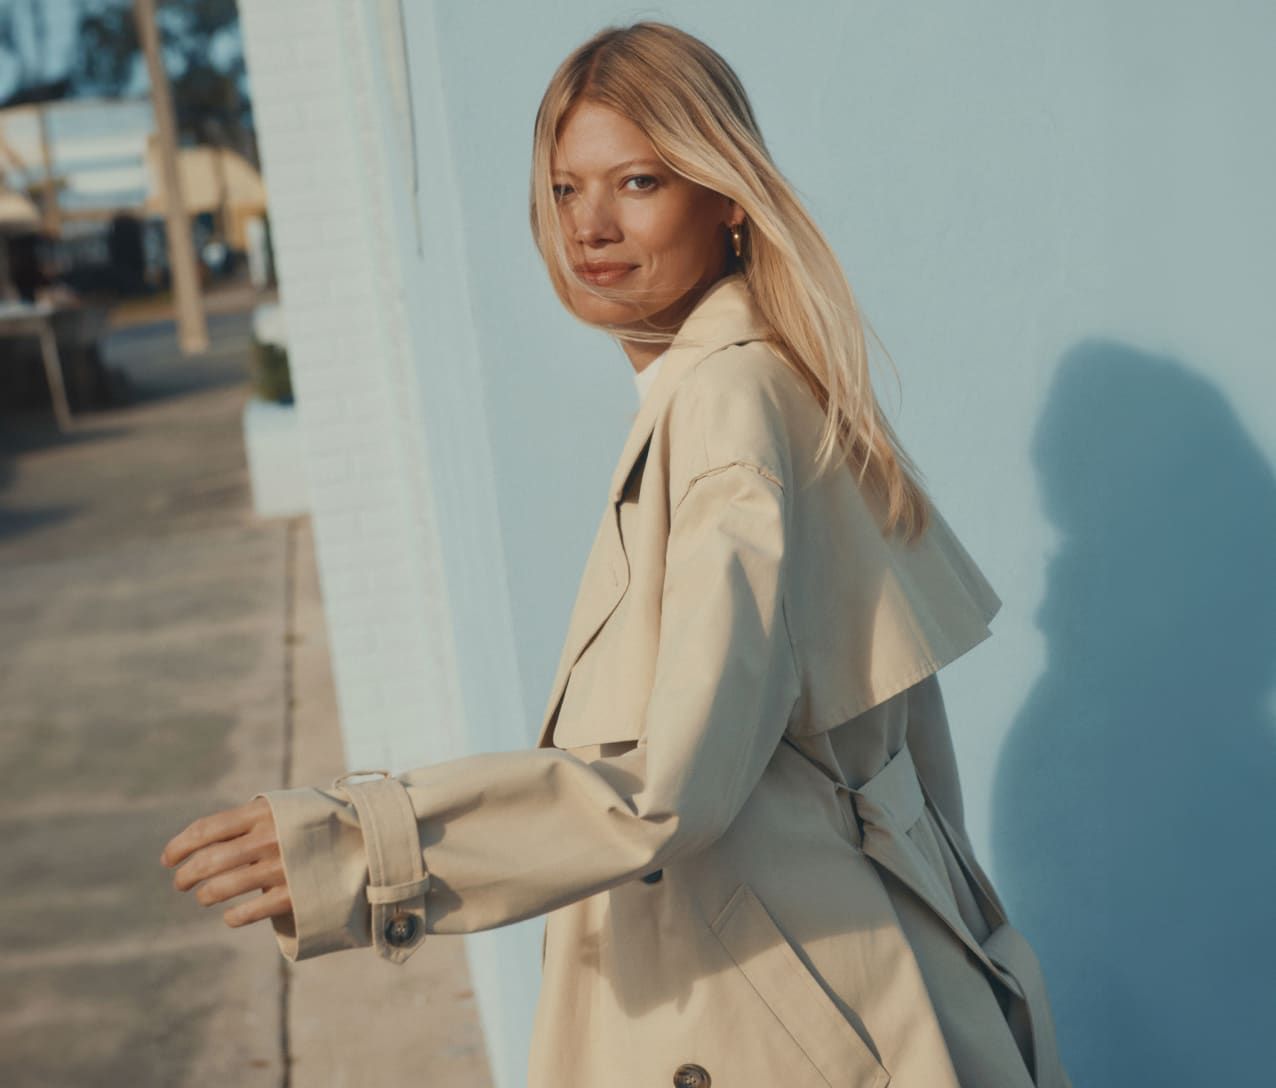 Model is wearing a beige short trench coat, a white top, and blue jeans.